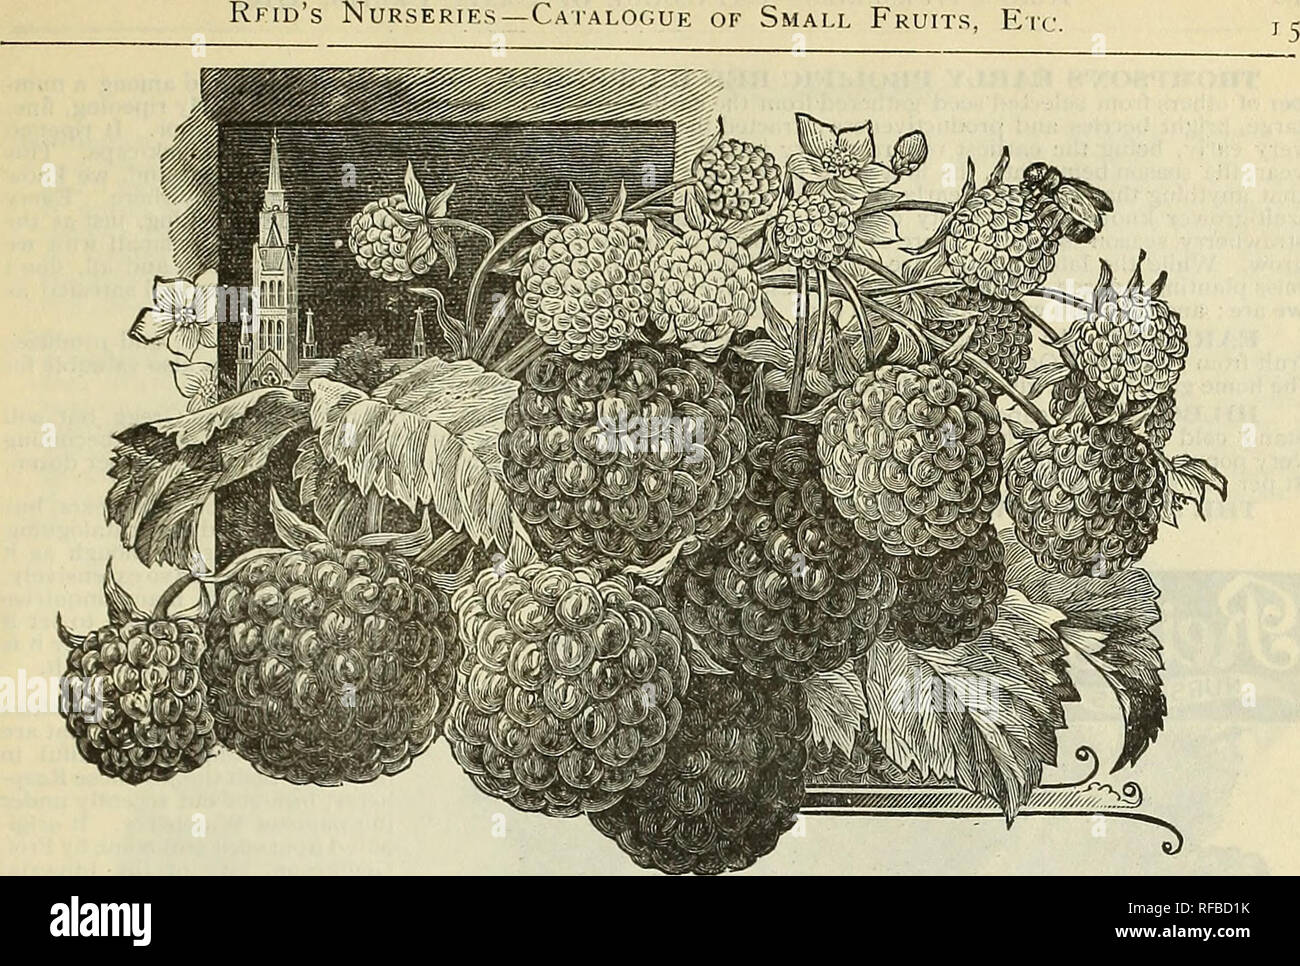 . Catalogue 1895 : everything for the fruit grower. Nurseries (Horticulture) Ohio Bridgeport Catalogs; Fruit trees Seedlings Catalogs; Fruit Catalogs; Plants, Ornamental Catalogs. ROYAL CHURCH. ROYAIi CHURCH, This promising new raspberry originated in Ofiio, and the claims for this valuable berrj'seem borne out by the testimonials of our leadmg horticulturists as to its merits ; the introducer describes it as'follows : &quot;Berry lar»e, dark crimson, hardy, firm and of good quality. Flavor exceedingly delicious, aromatic and sprightly, and outsells other varieties in the market. It is excelle Stock Photo